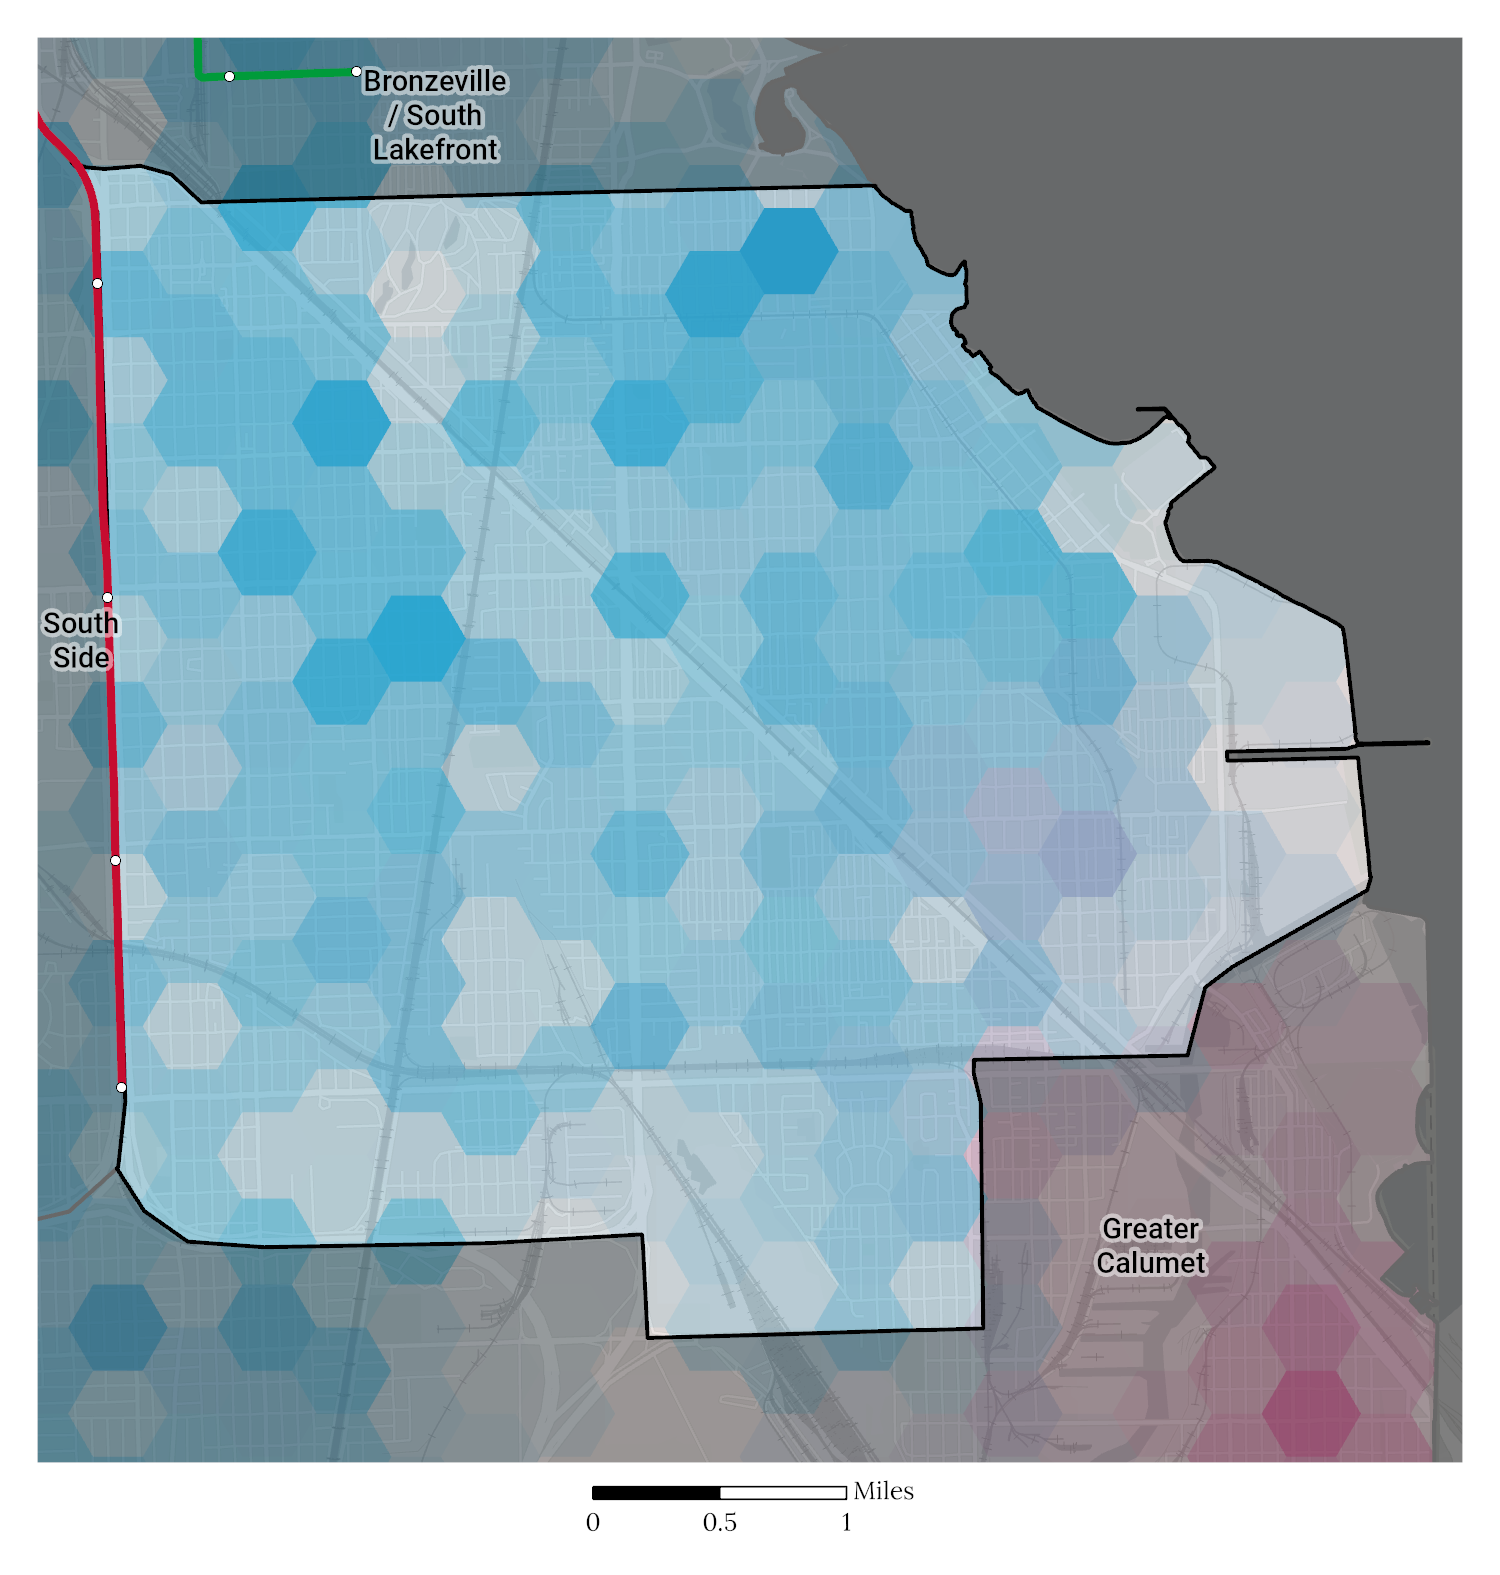 Racial and Ethnic composition map of  Greater Stony Island